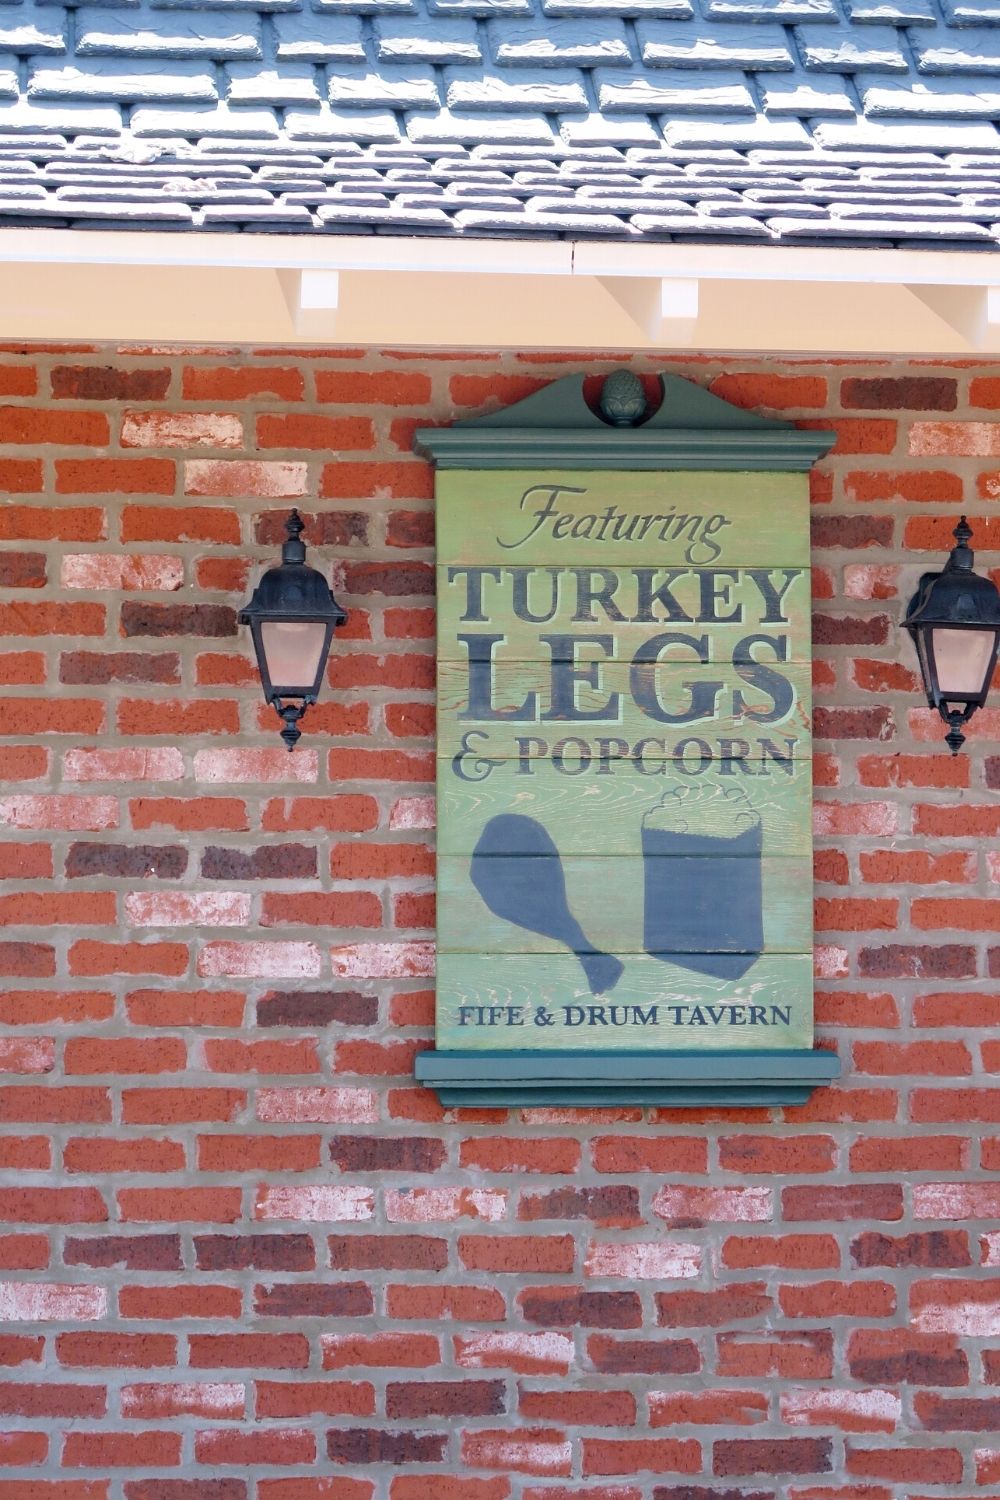 a sign from Fife and Drum Tavern in Great Britain pavilion at Epcot advertises turkey legs and popcorn, which are popular snacks at Disney World